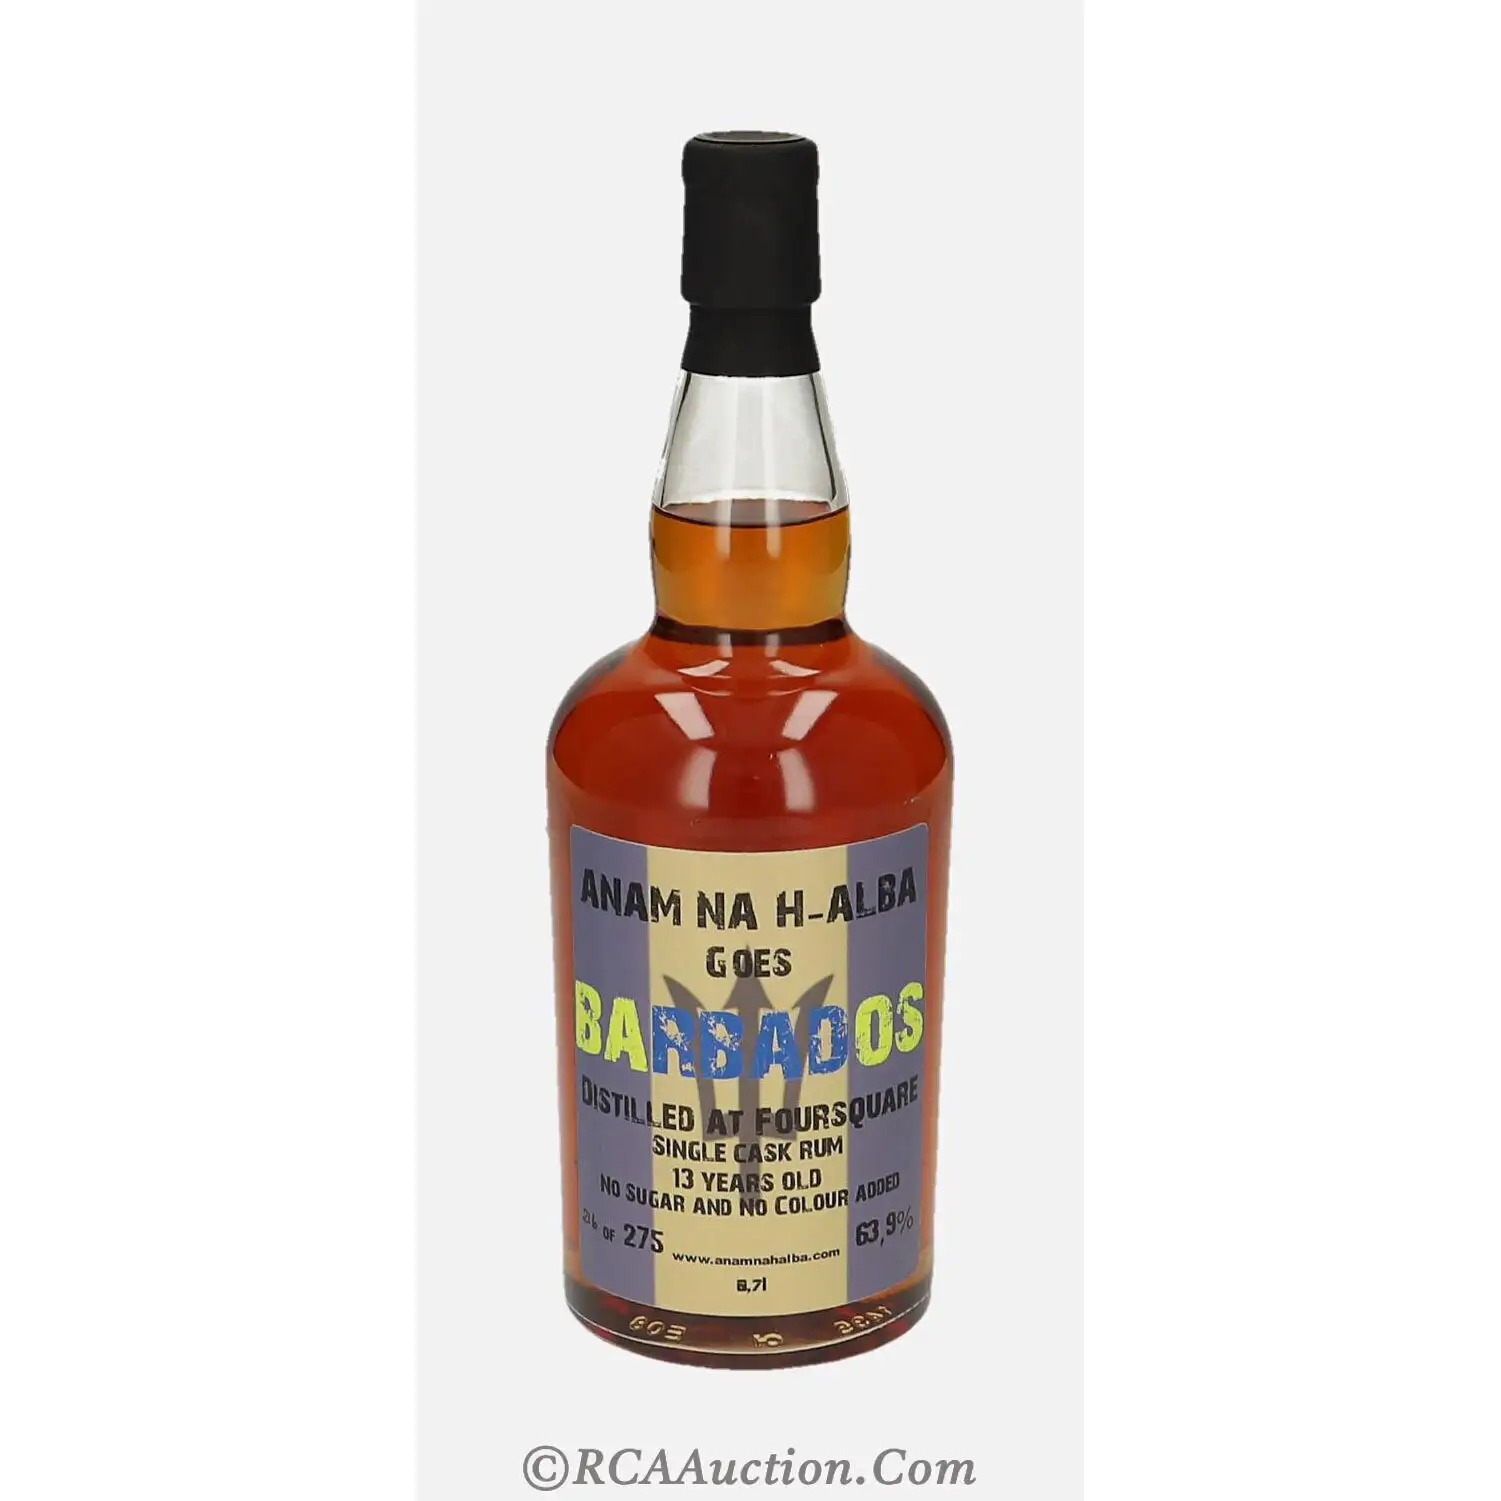 Image of the front of the bottle of the rum Barbados Single Cask Rum